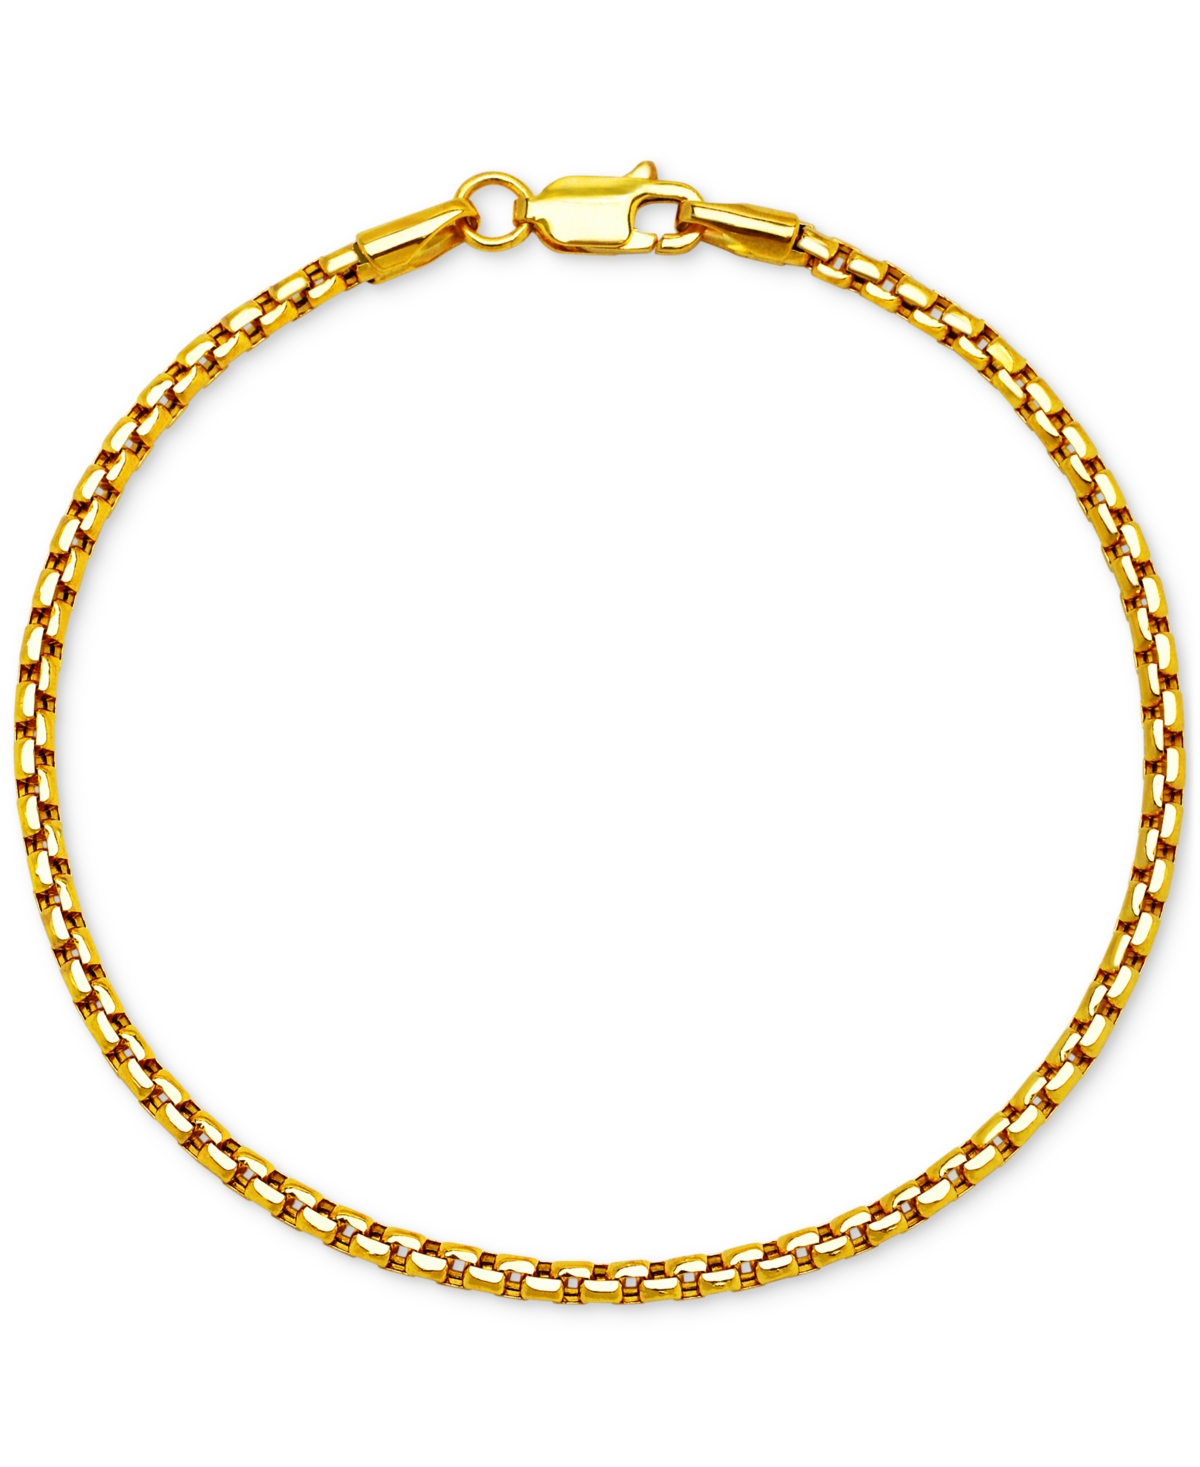 Rounded Box Link Chain Bracelet 8", in 14k Gold - Yellow Gold